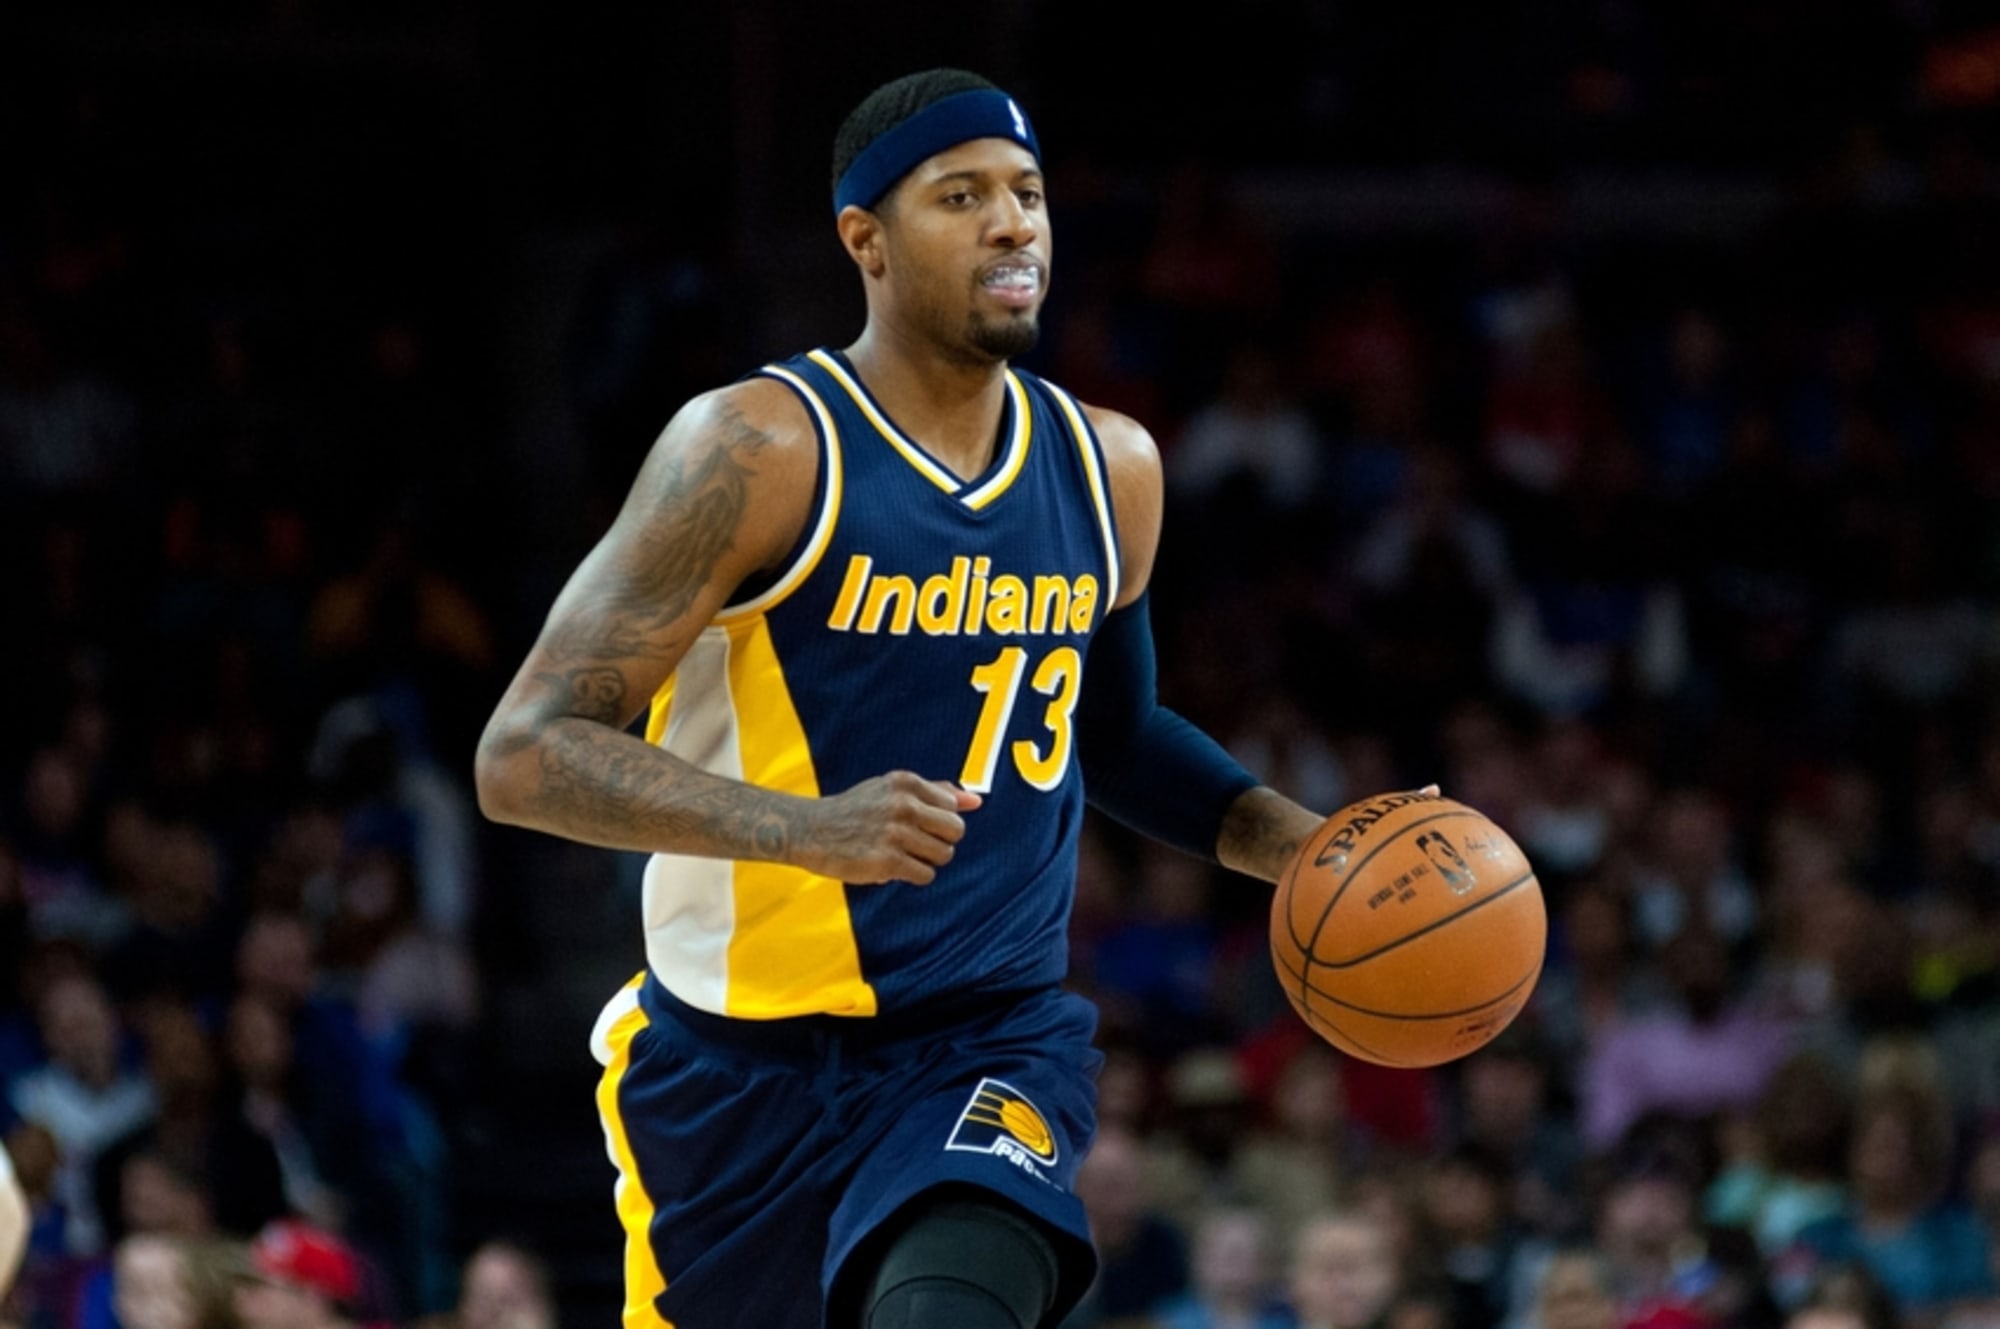 Paul George's Return: How Does the Pacers Star Look So Far?